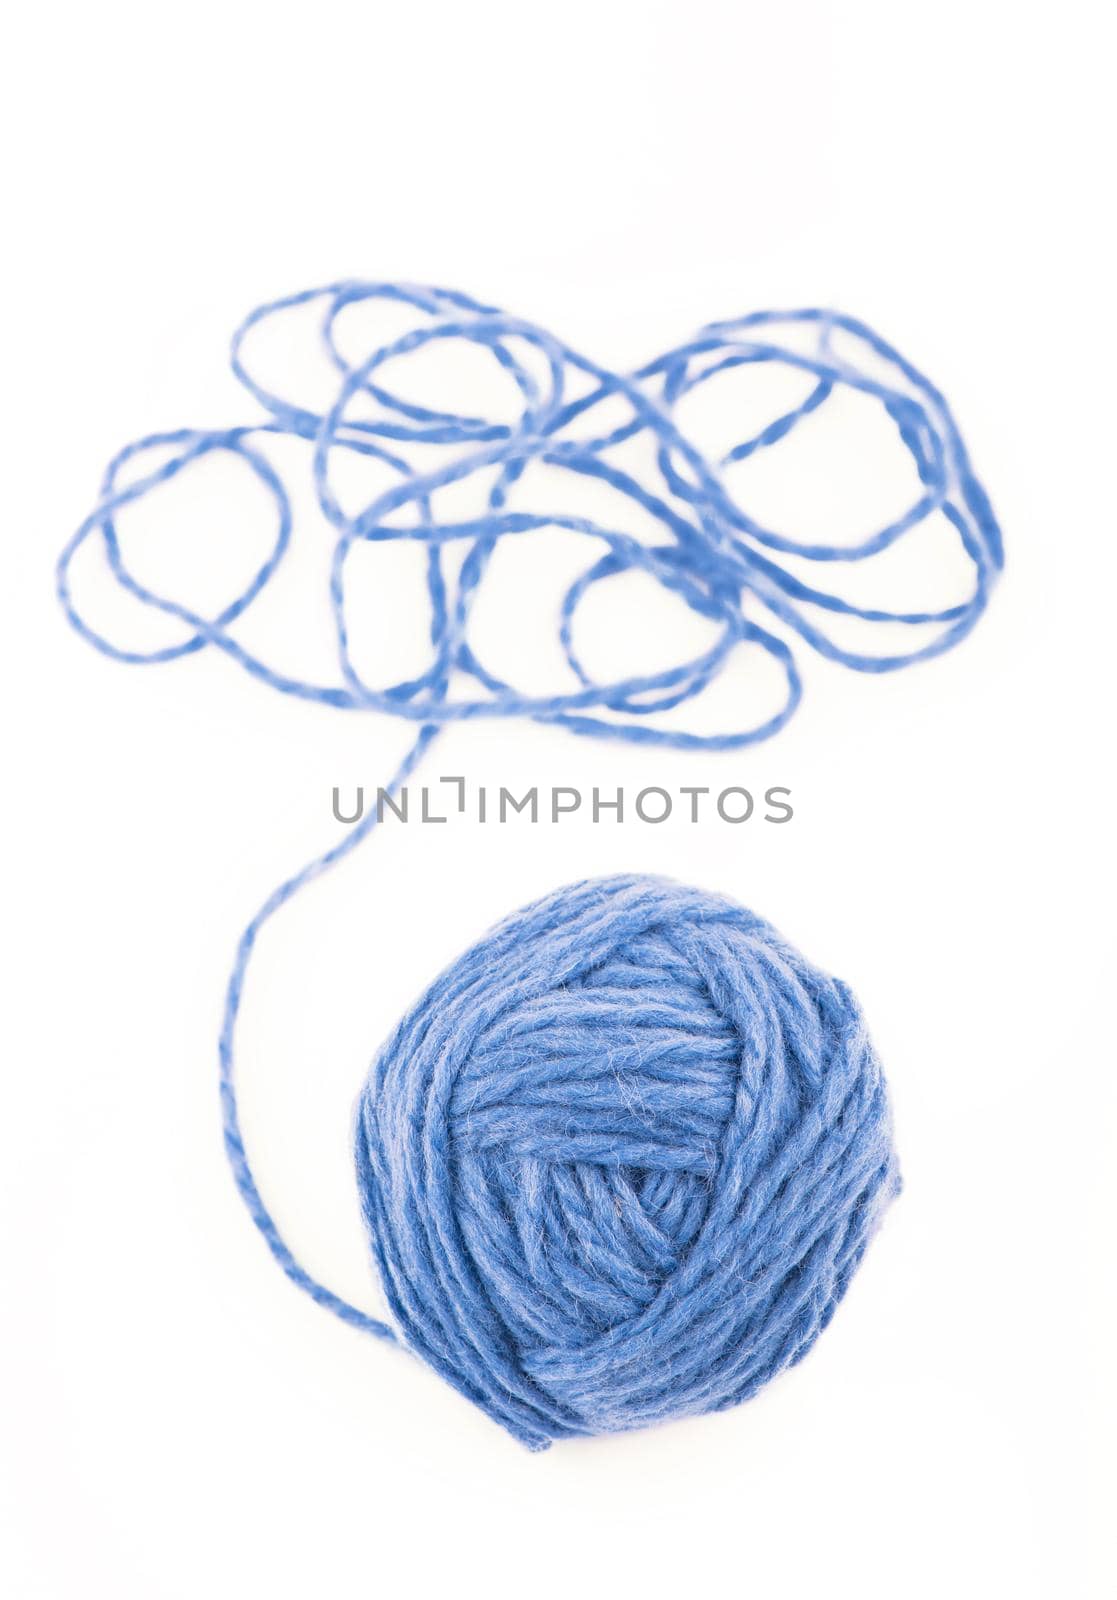 The idea is a tangled thread. Blue ball of yarn on white background